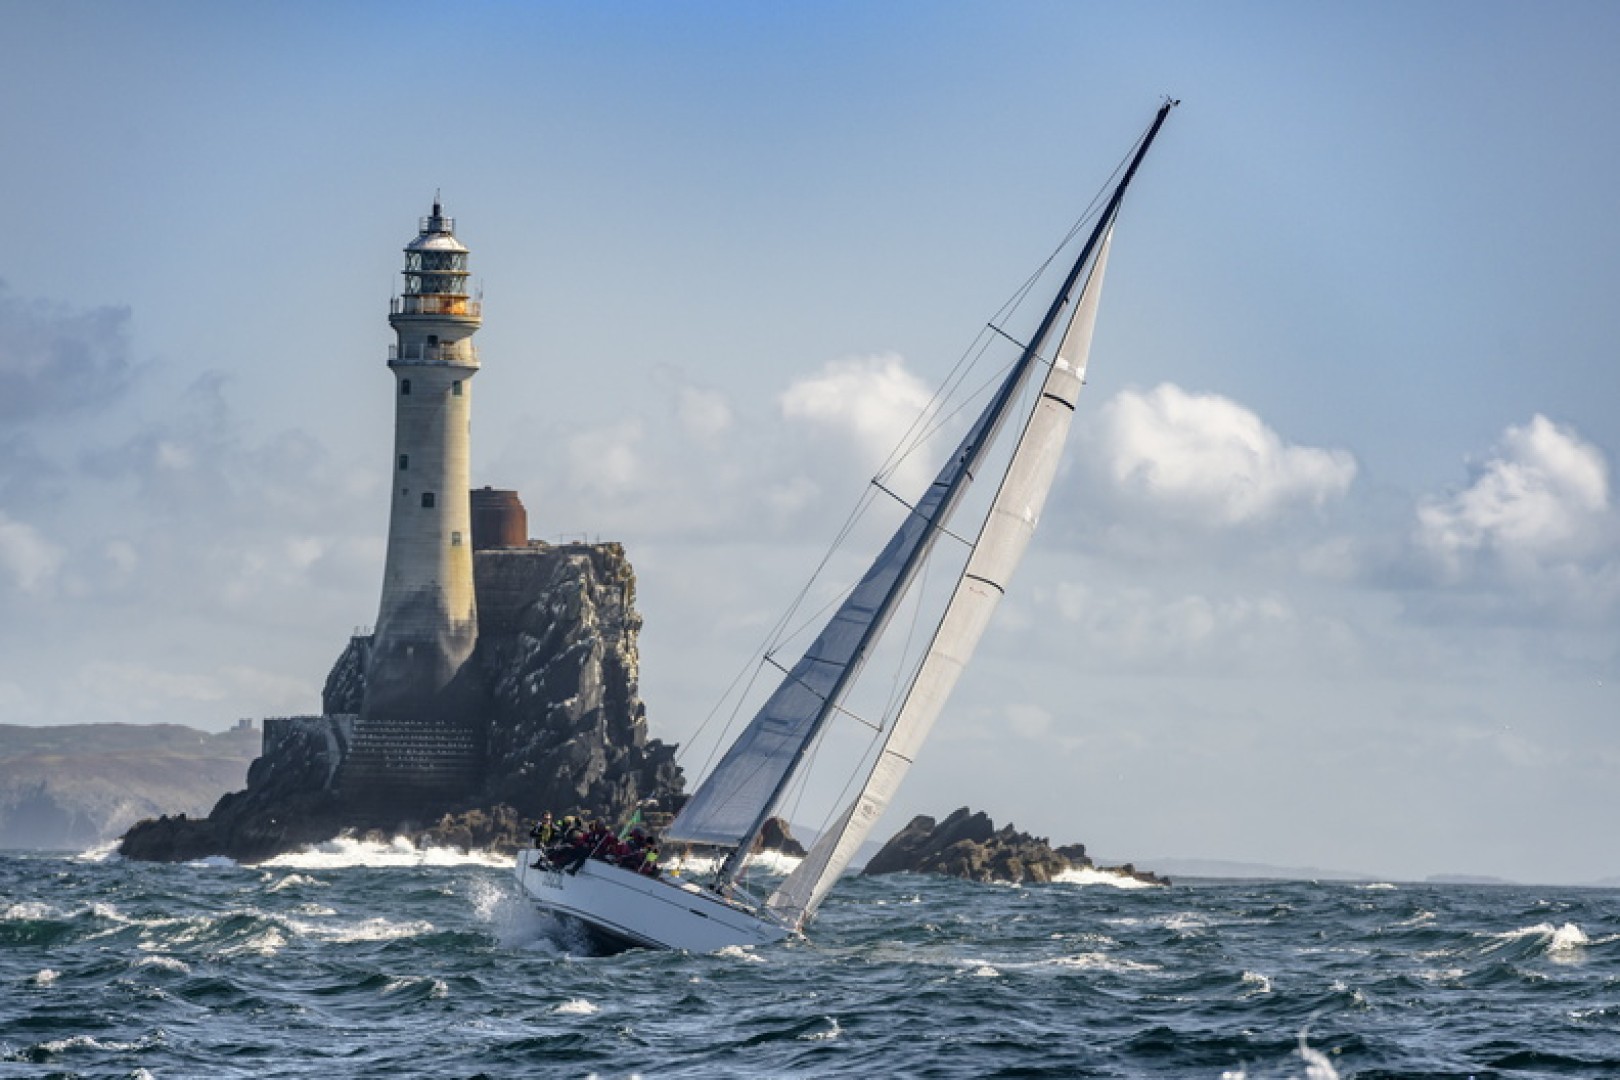 One Year to Go! The world's largest offshore race - The Rolex Fastnet Race starts on Saturday